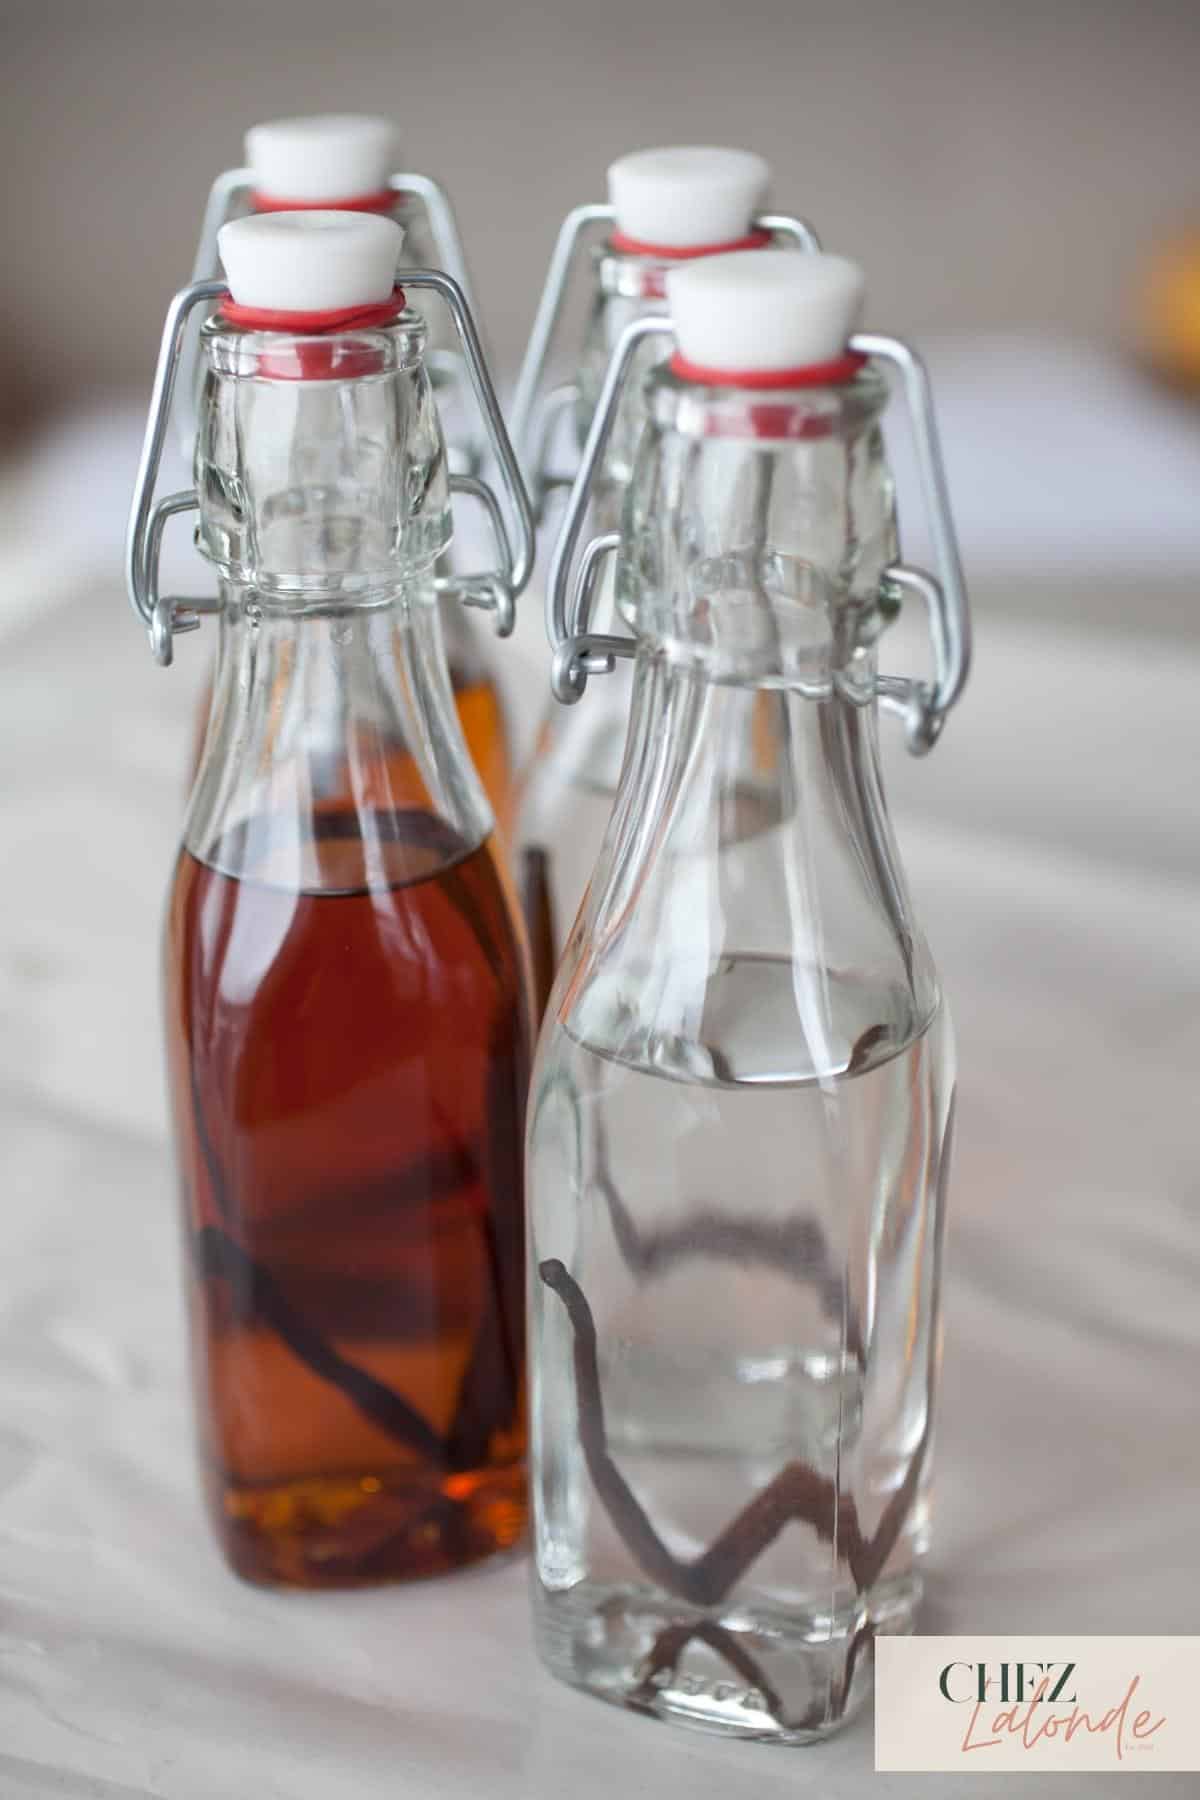 Traditional way to infuse and make vanilla extract.